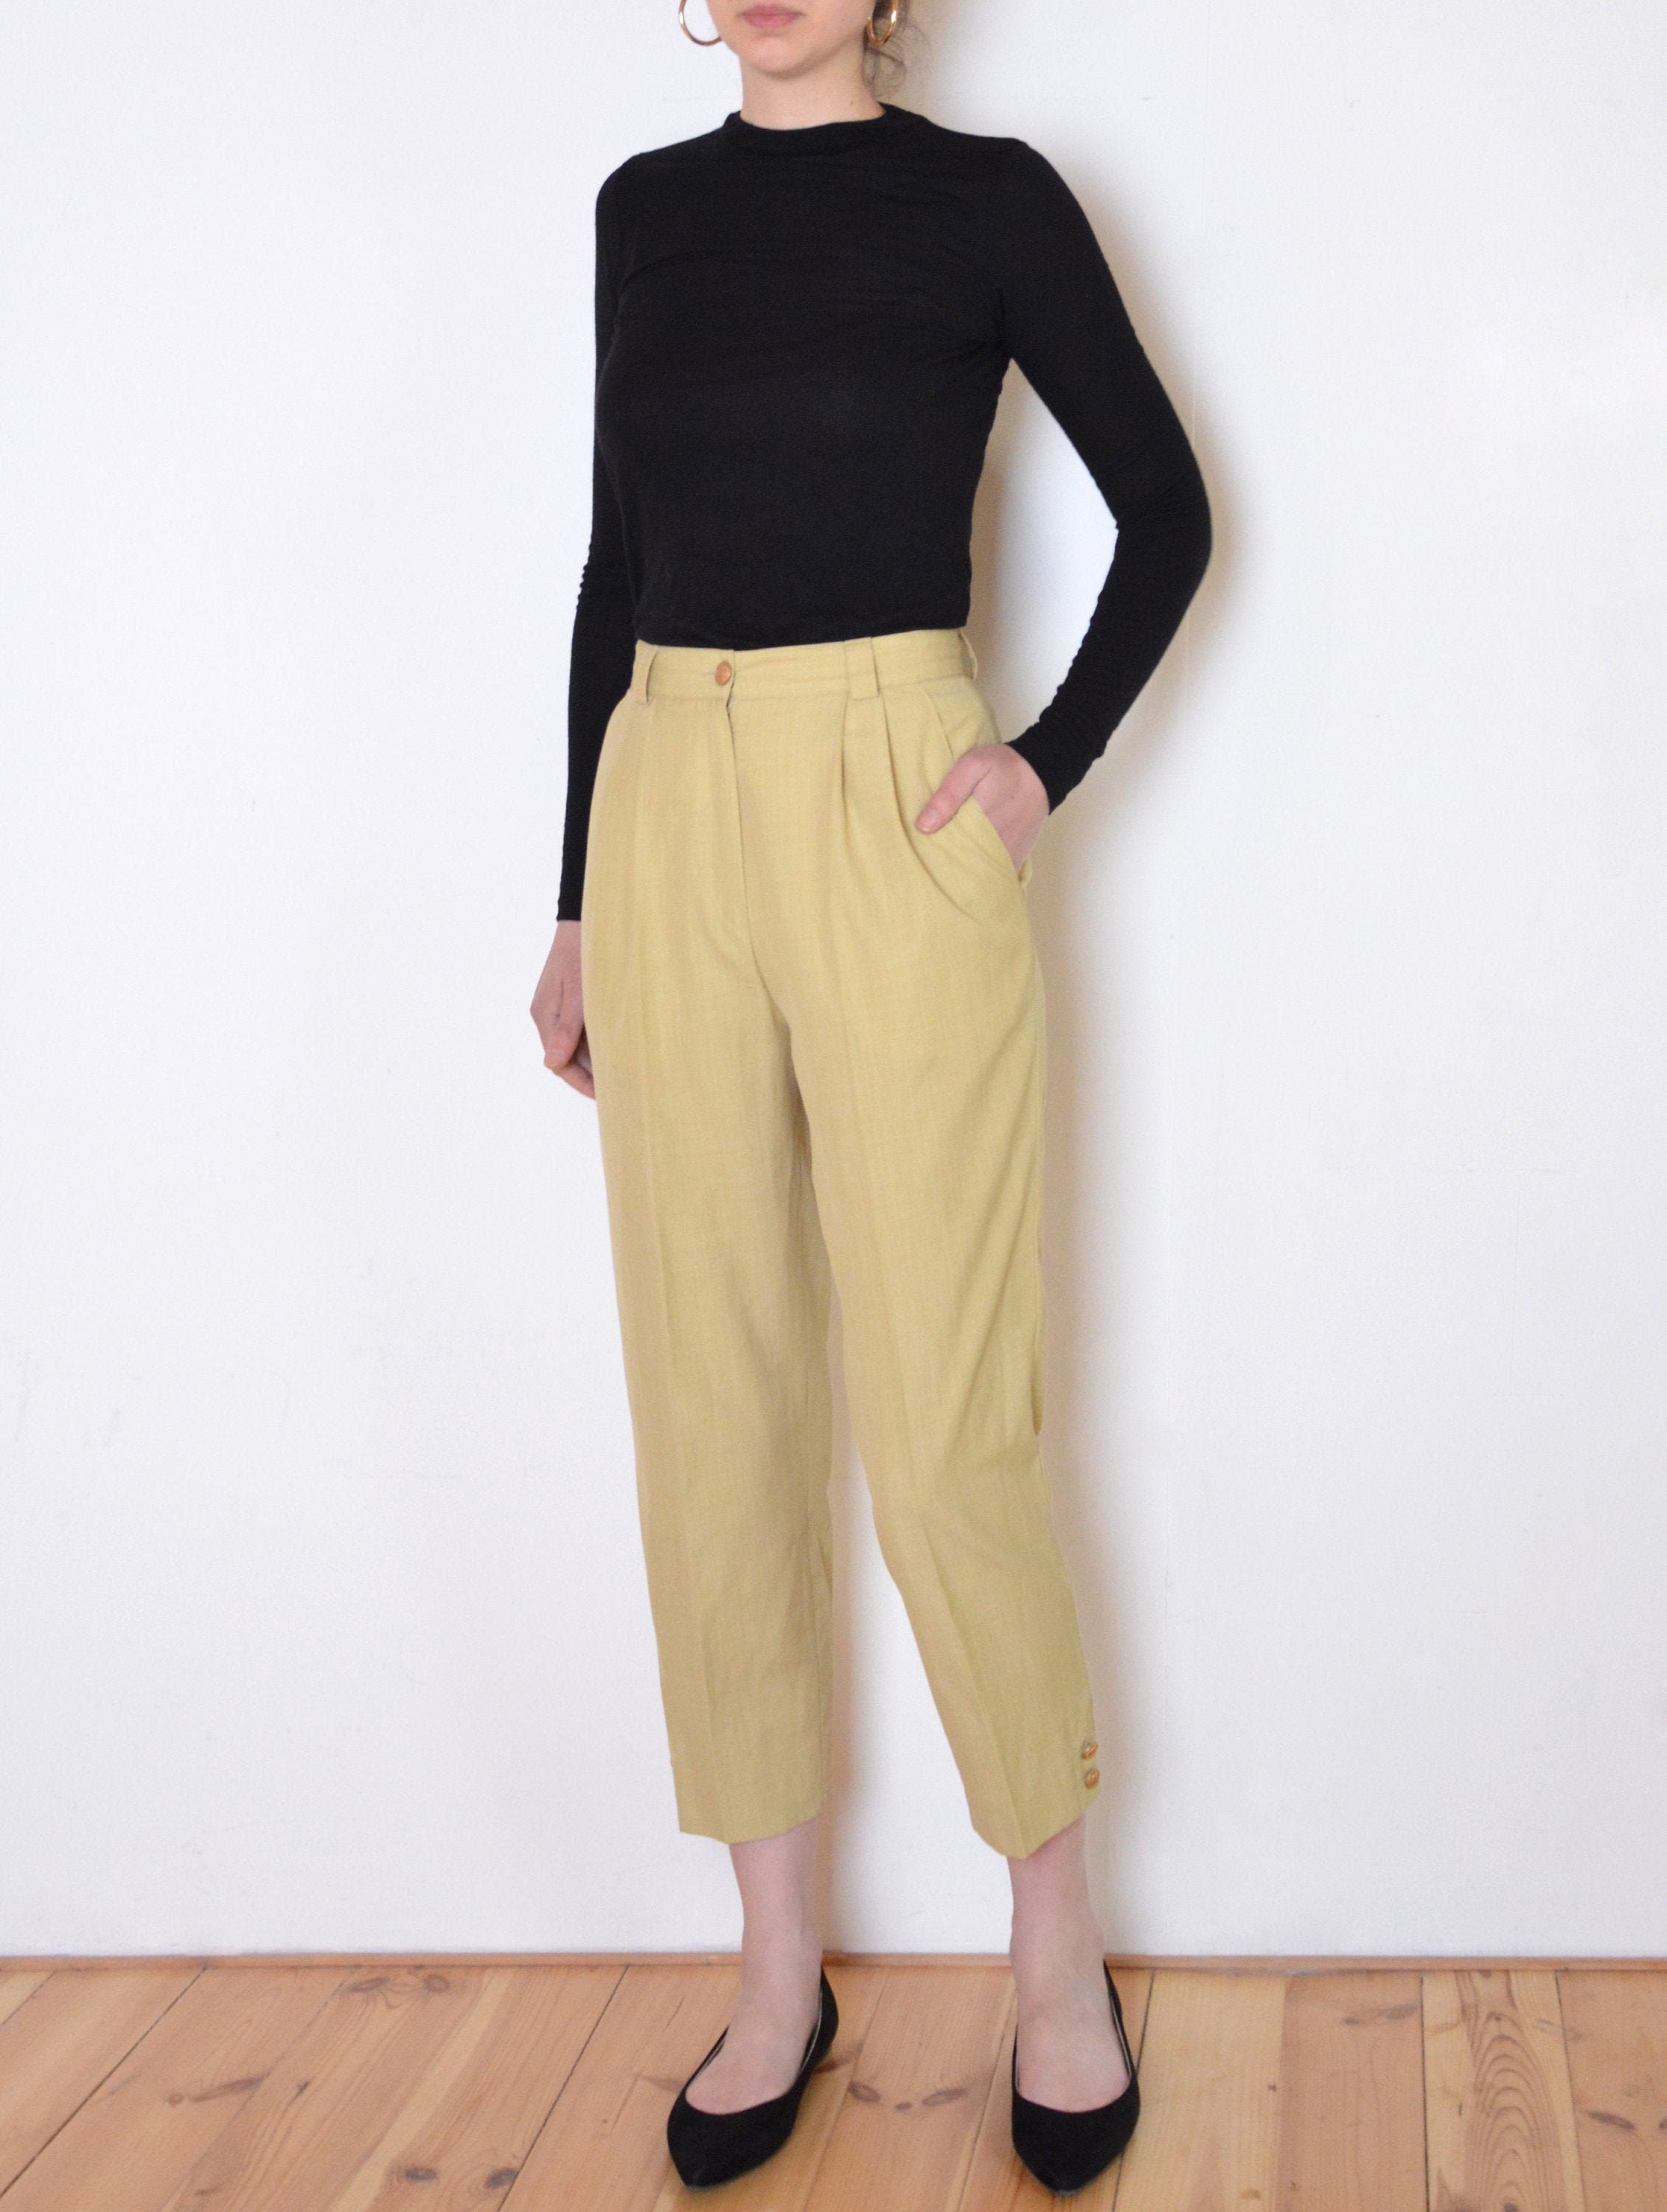 90's Beige Wool Blend Pants, Yellow High Waisted Minimalist Preppy Retro Cropped Small